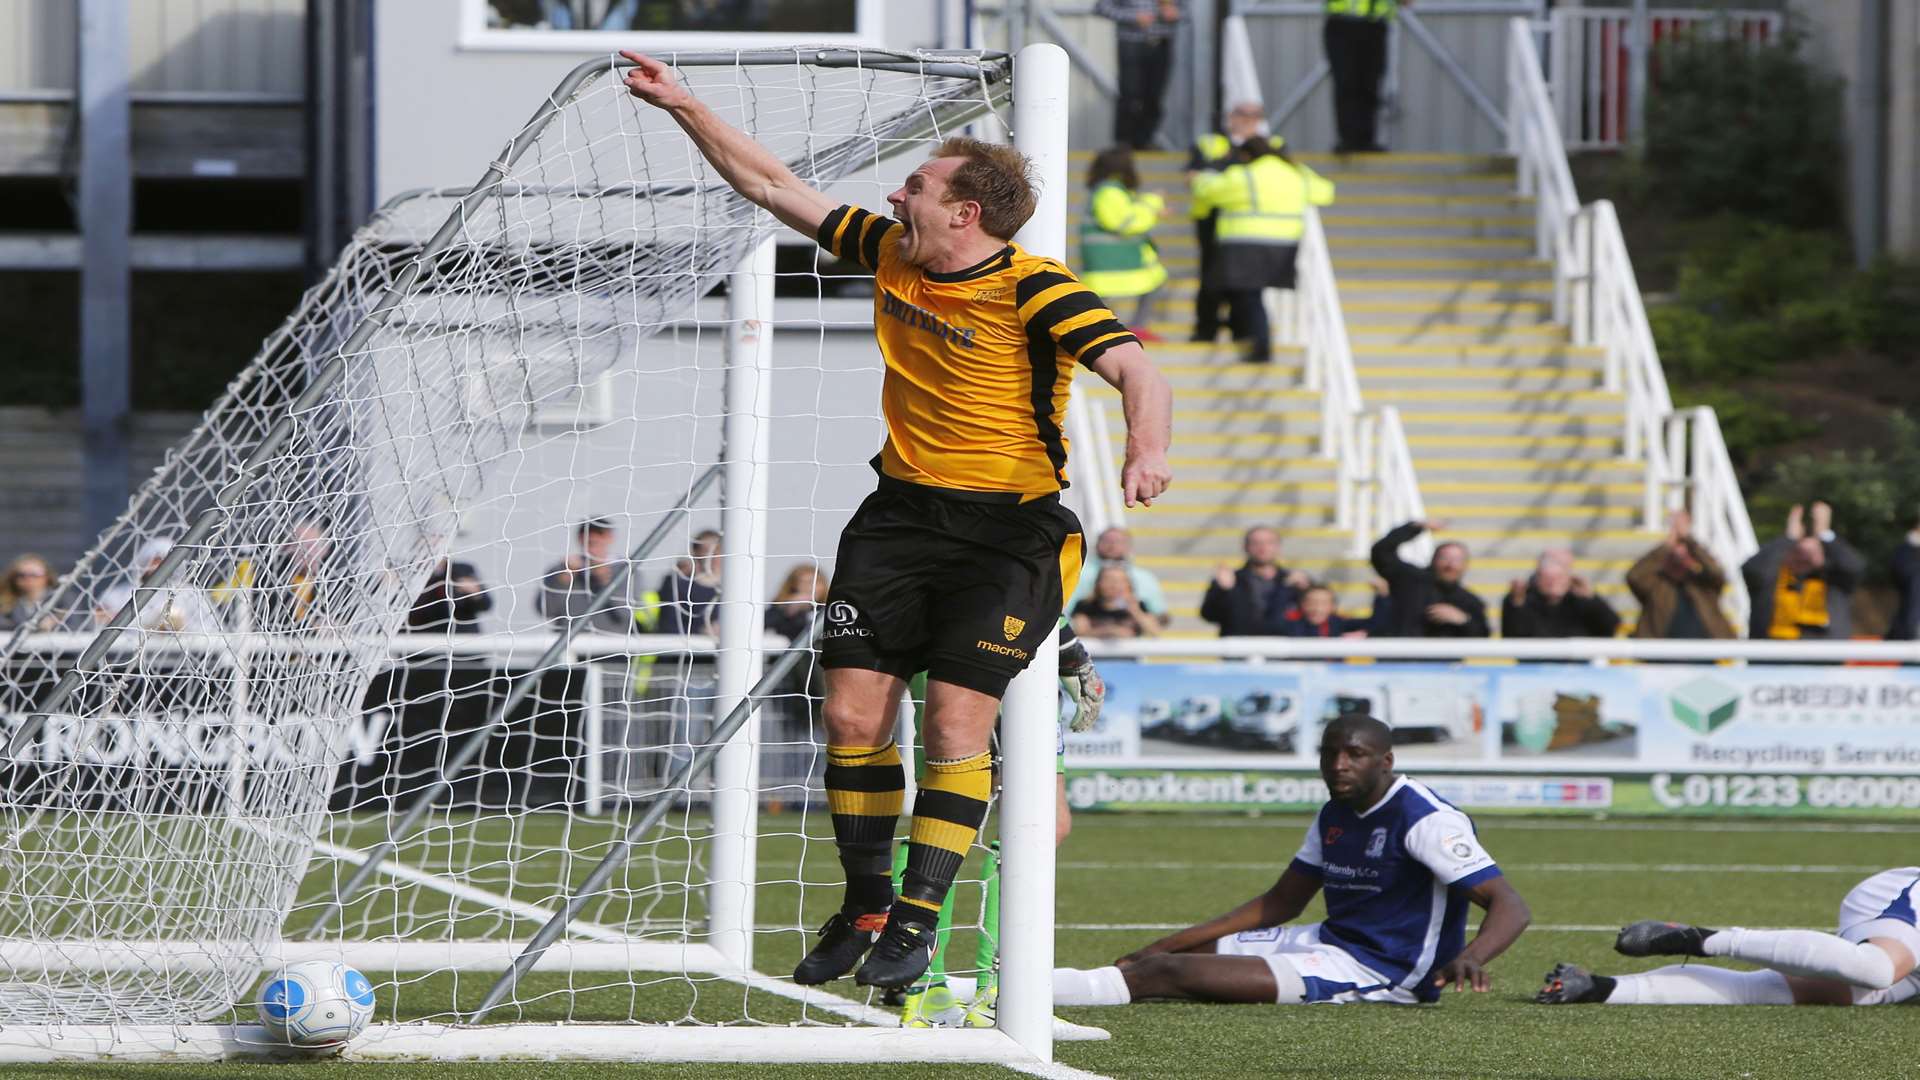 The celebrations continue for Maidstone's match-winner Picture: Andy Jones